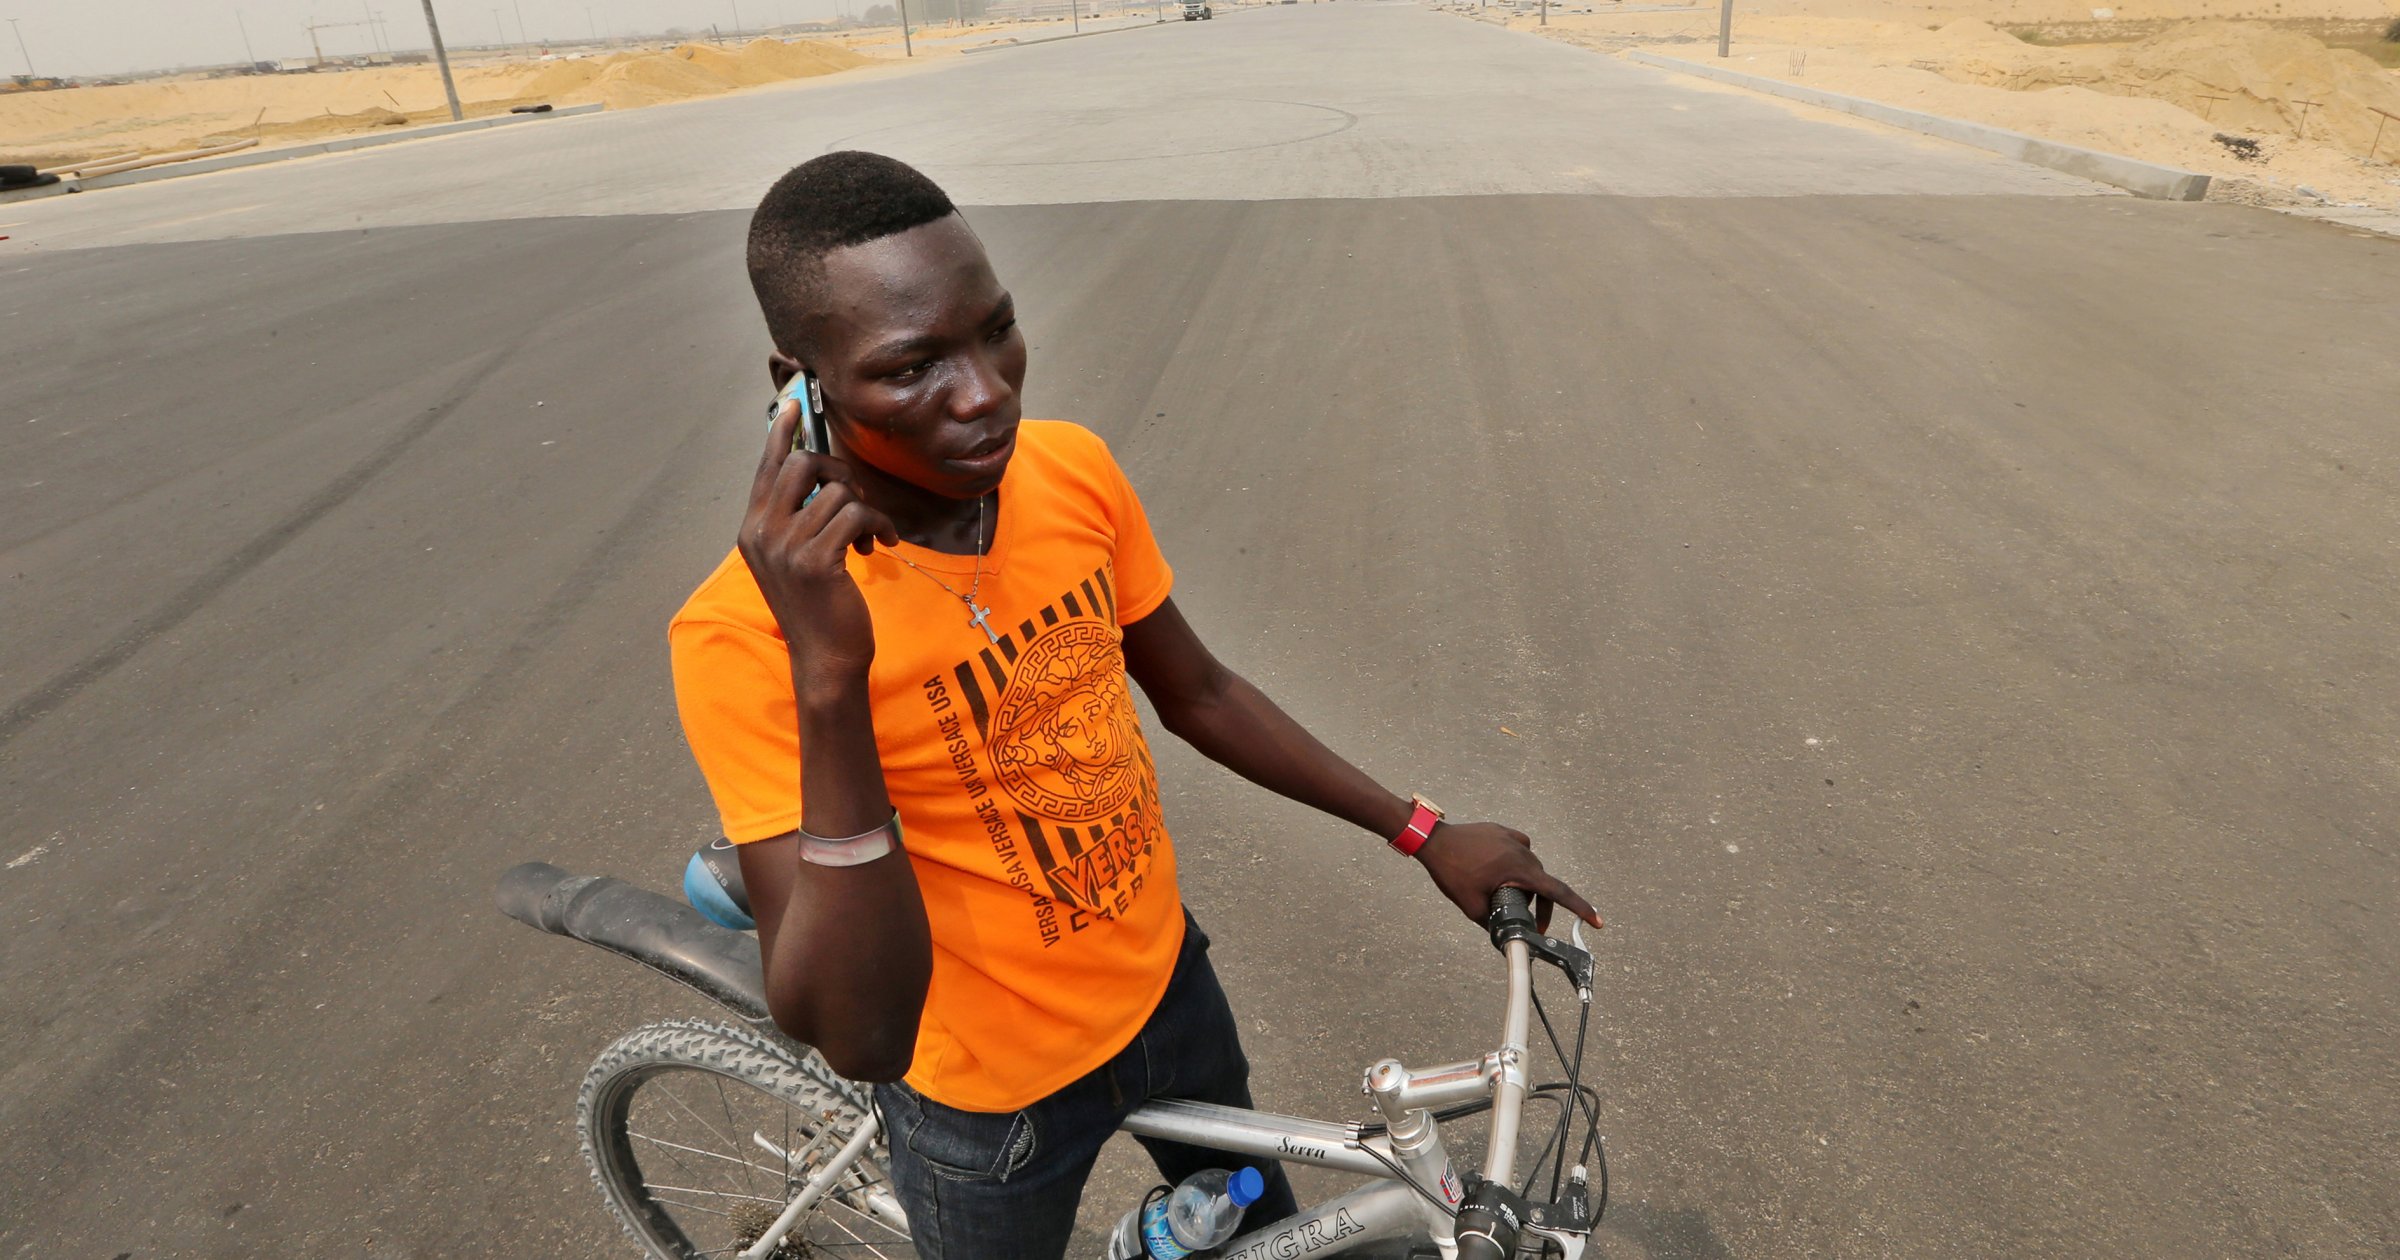 A cyclist stops to make a mobile phone call on a newly surfaced boulevard at the Eko Atlantic City site, developed by Eko Atlantic, near Victoria Island in Lagos, Nigeria on Feb. 12, 2016.